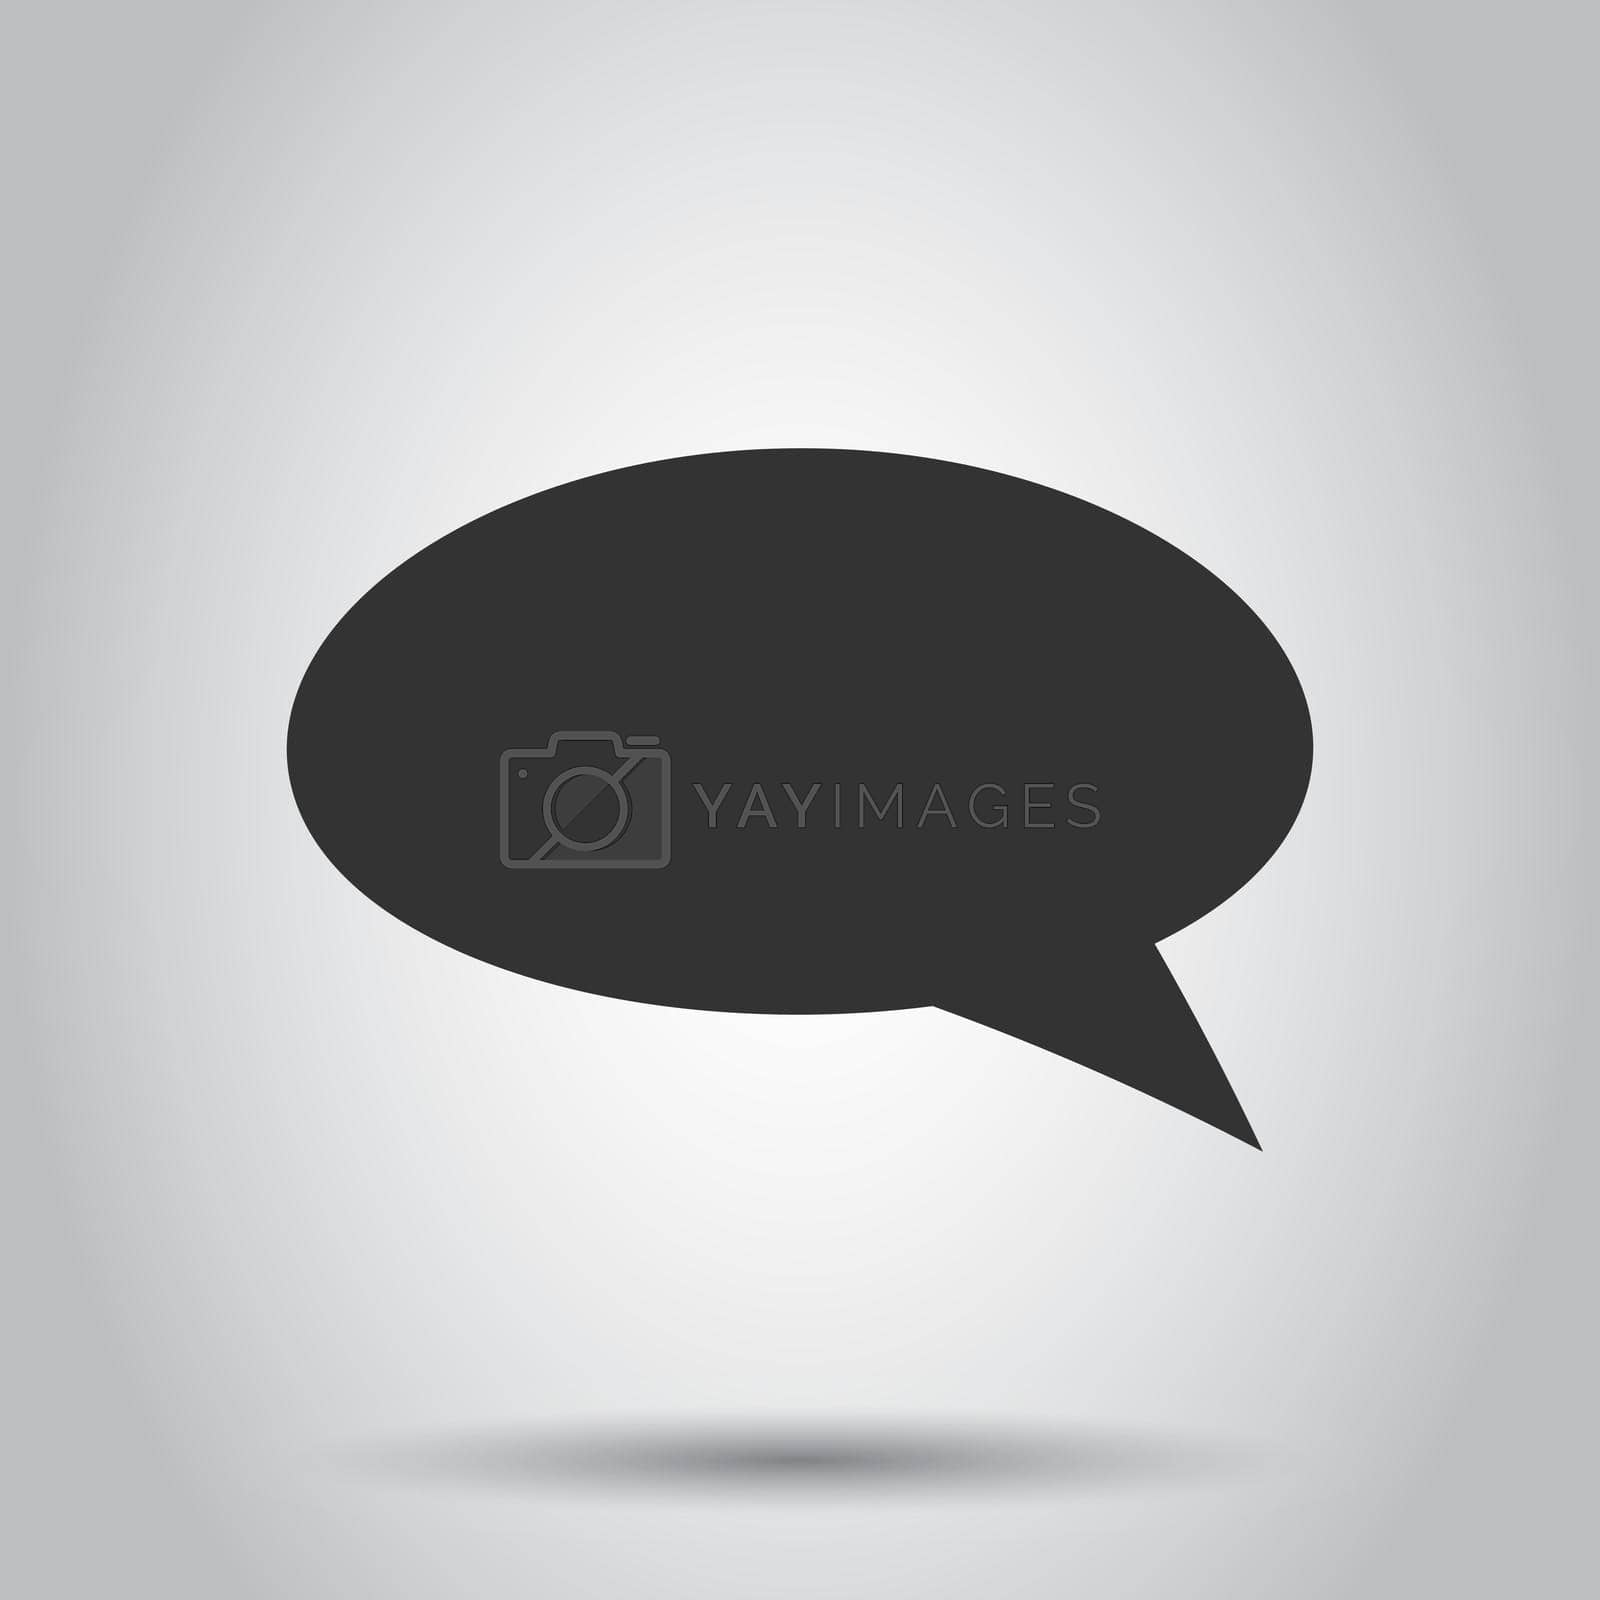 Royalty free image of Blank empty speech bubble vector icon in flat style. Dialogue box on white background. Speech message business concept. by LysenkoA